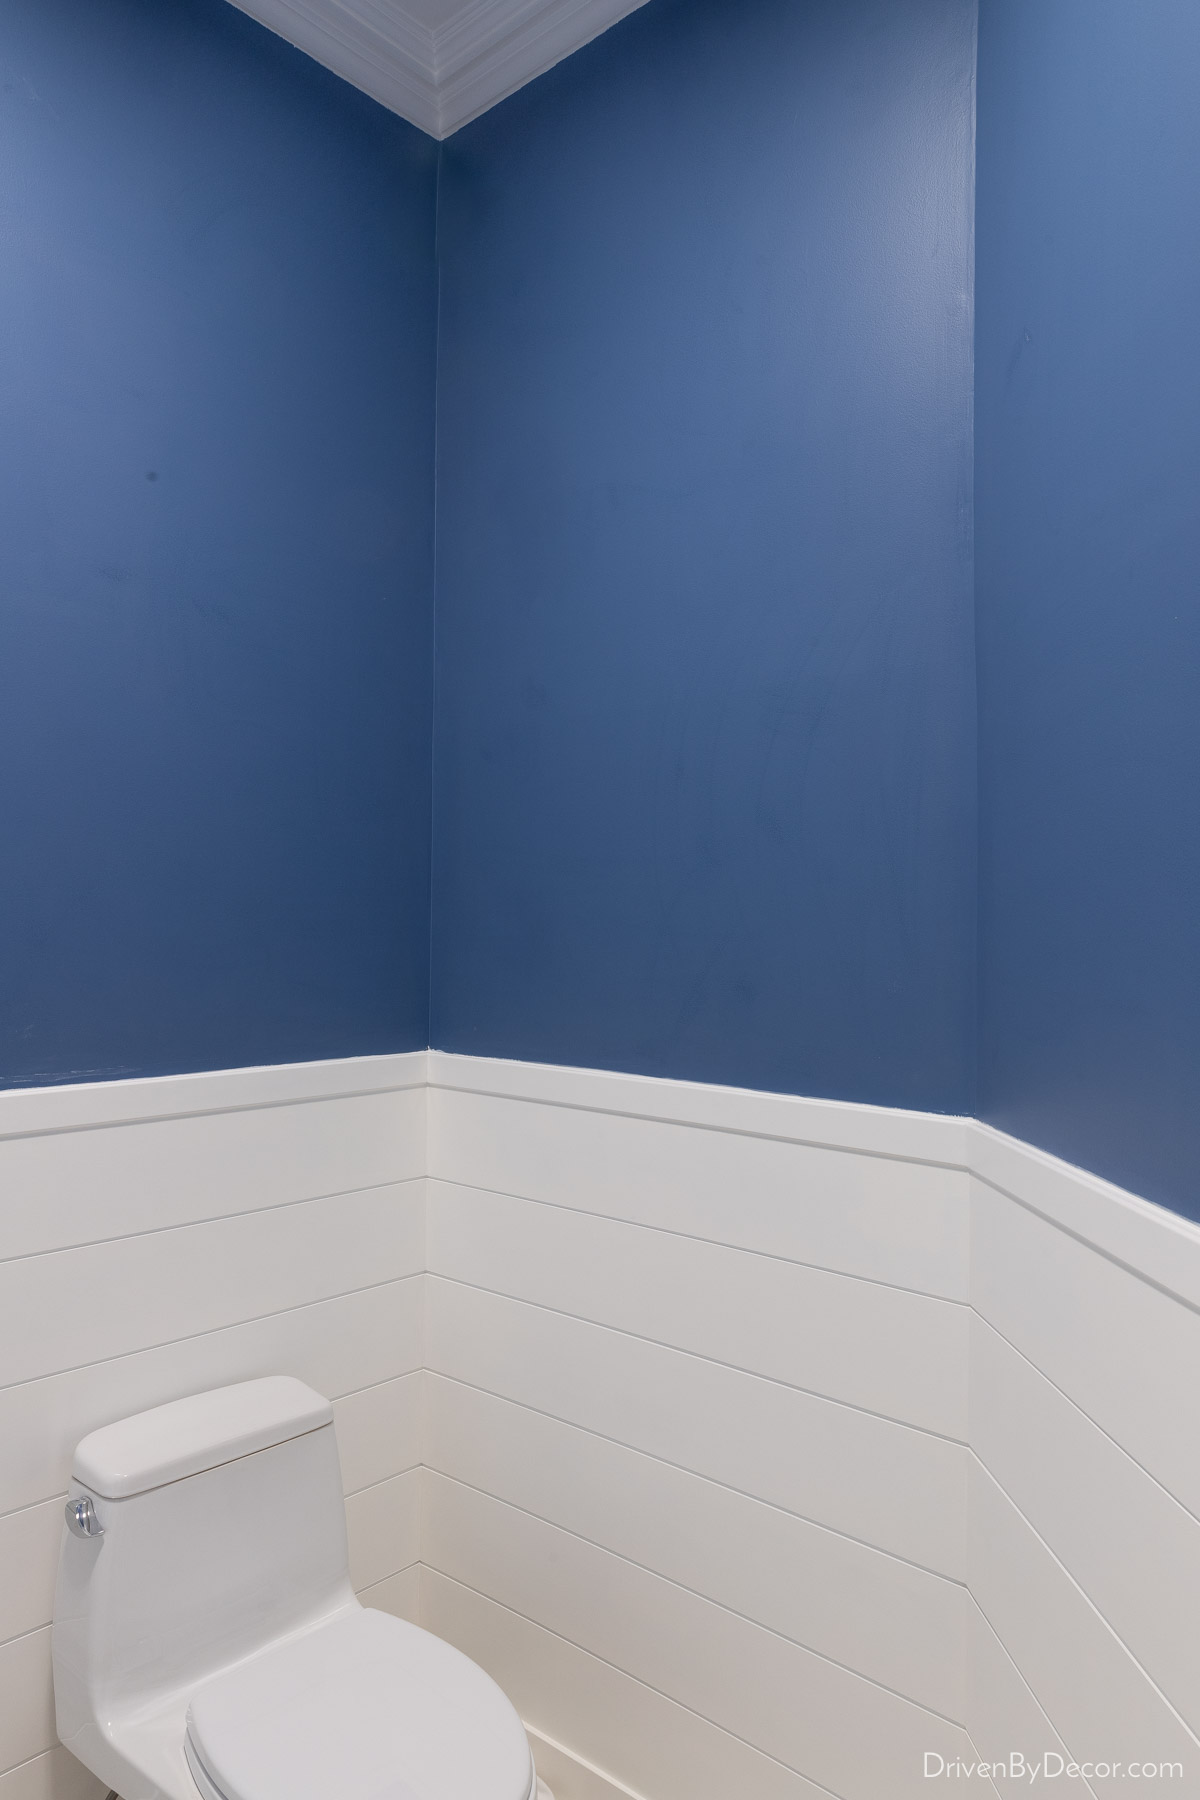 Blue tinted wall sizer applied to walls before wallpaper installation